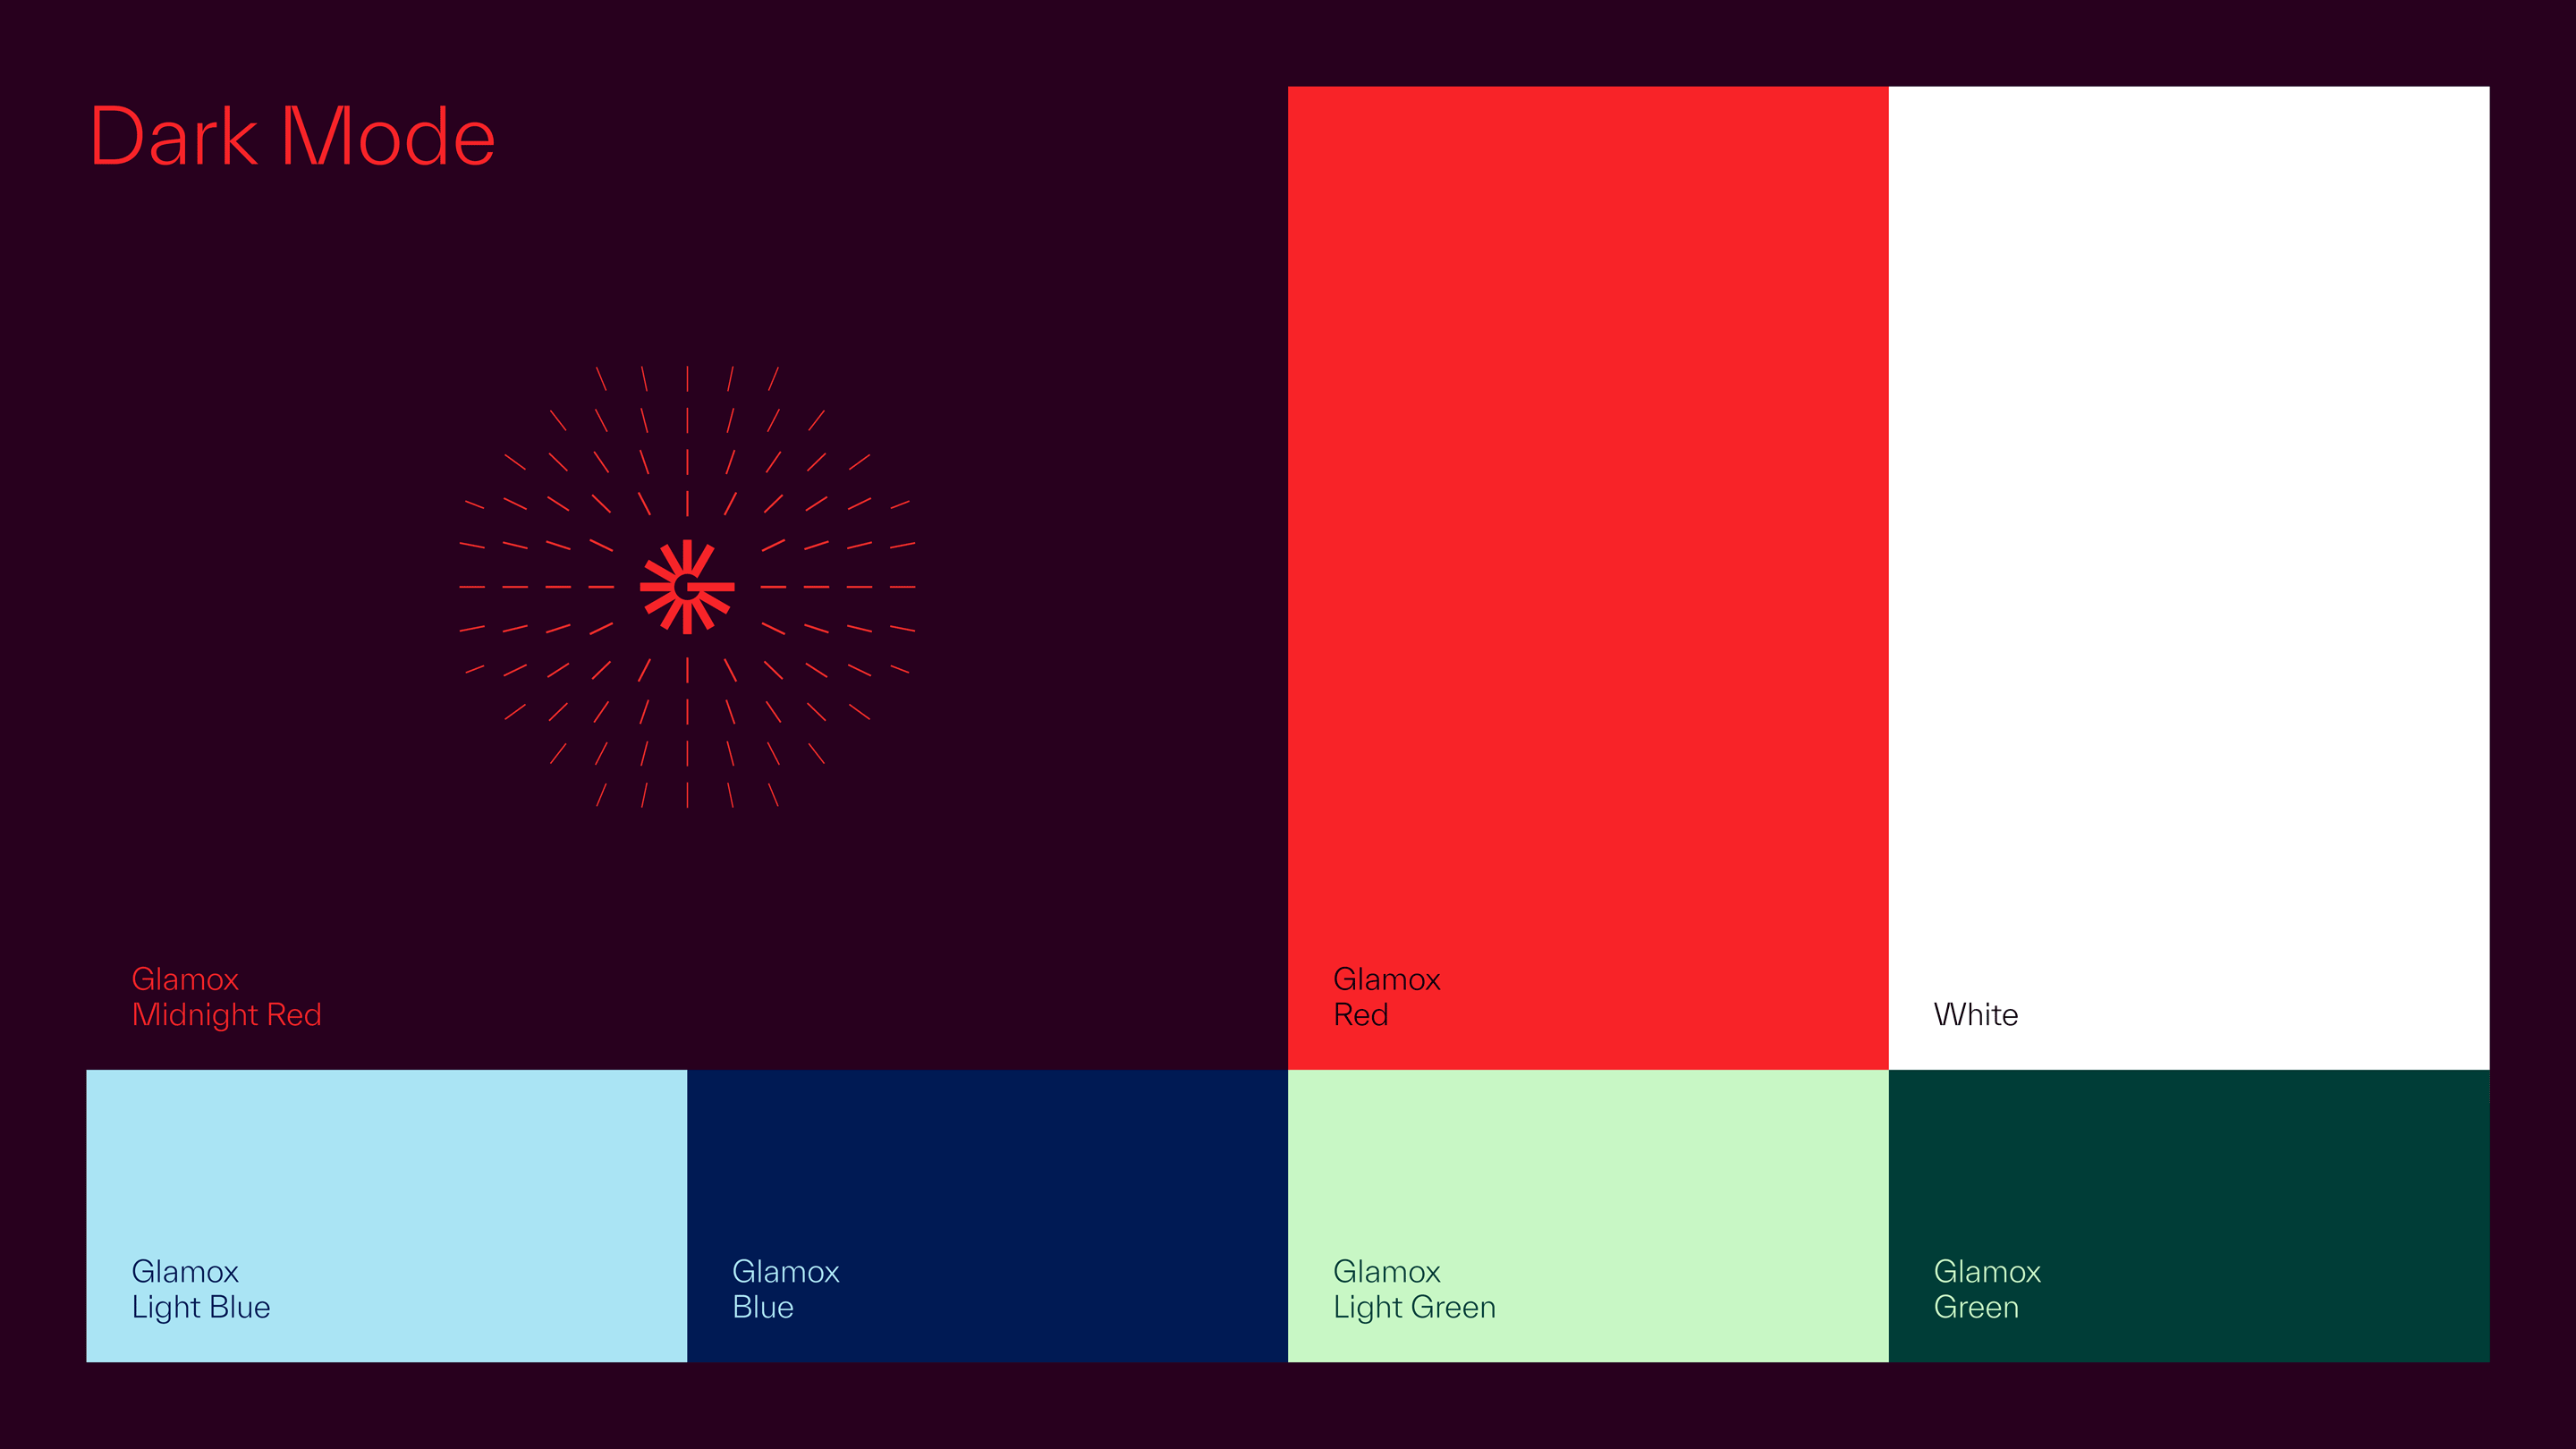 An animation showing the different versions of the Glamox colour pallet.